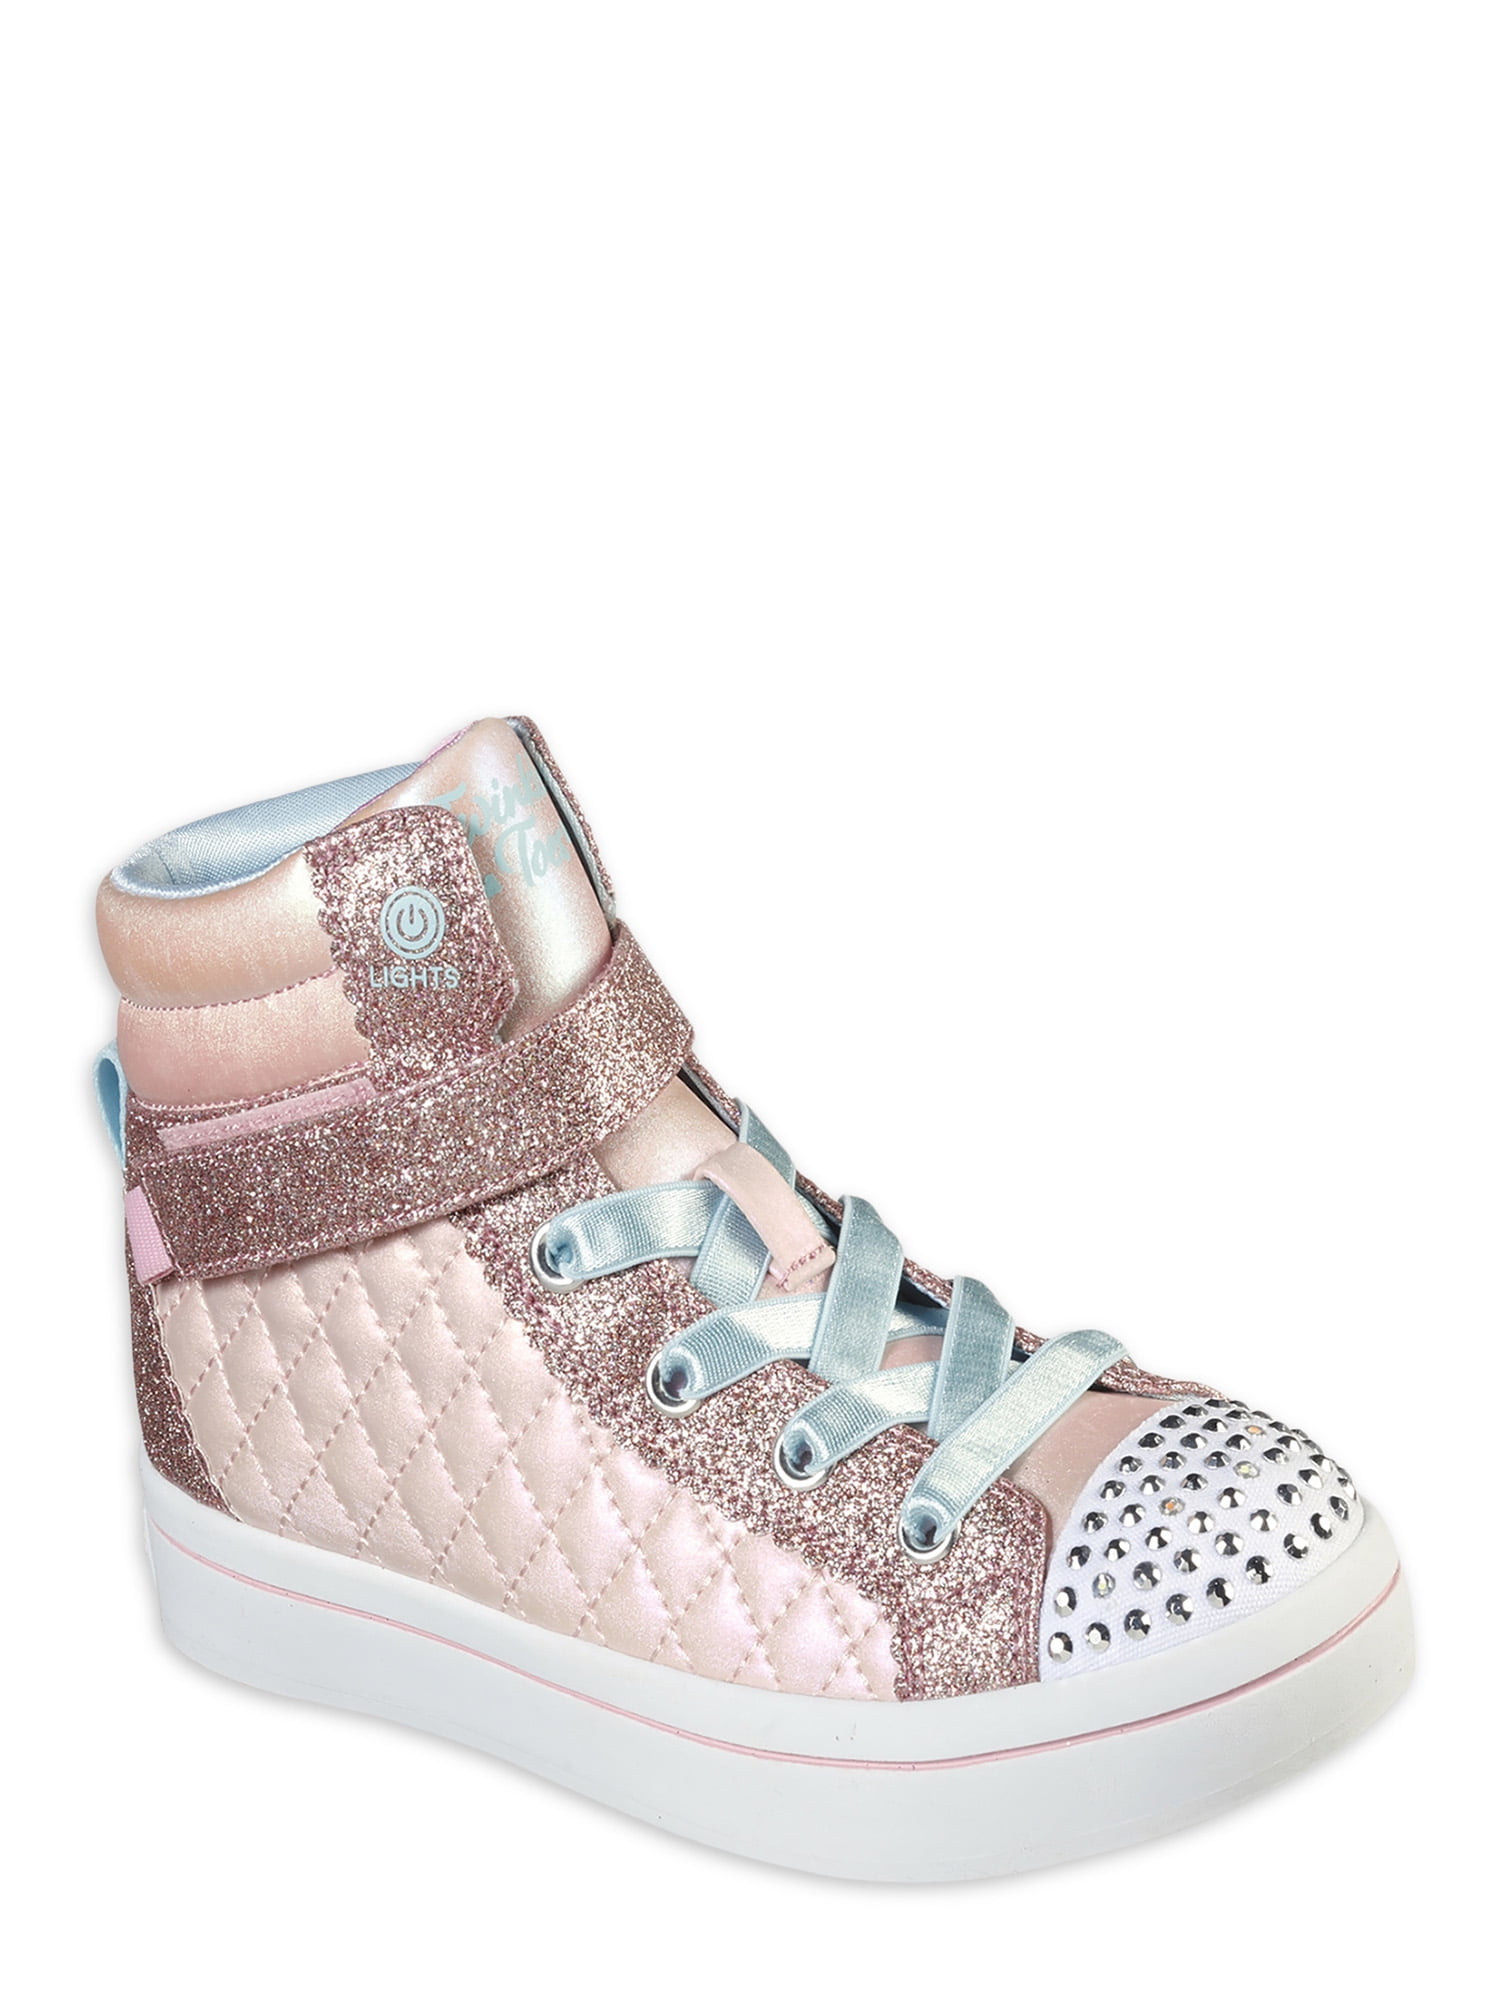 Skechers Twi-Lite High Top Light Up Sneakers (Little Girl and Big Girl ...